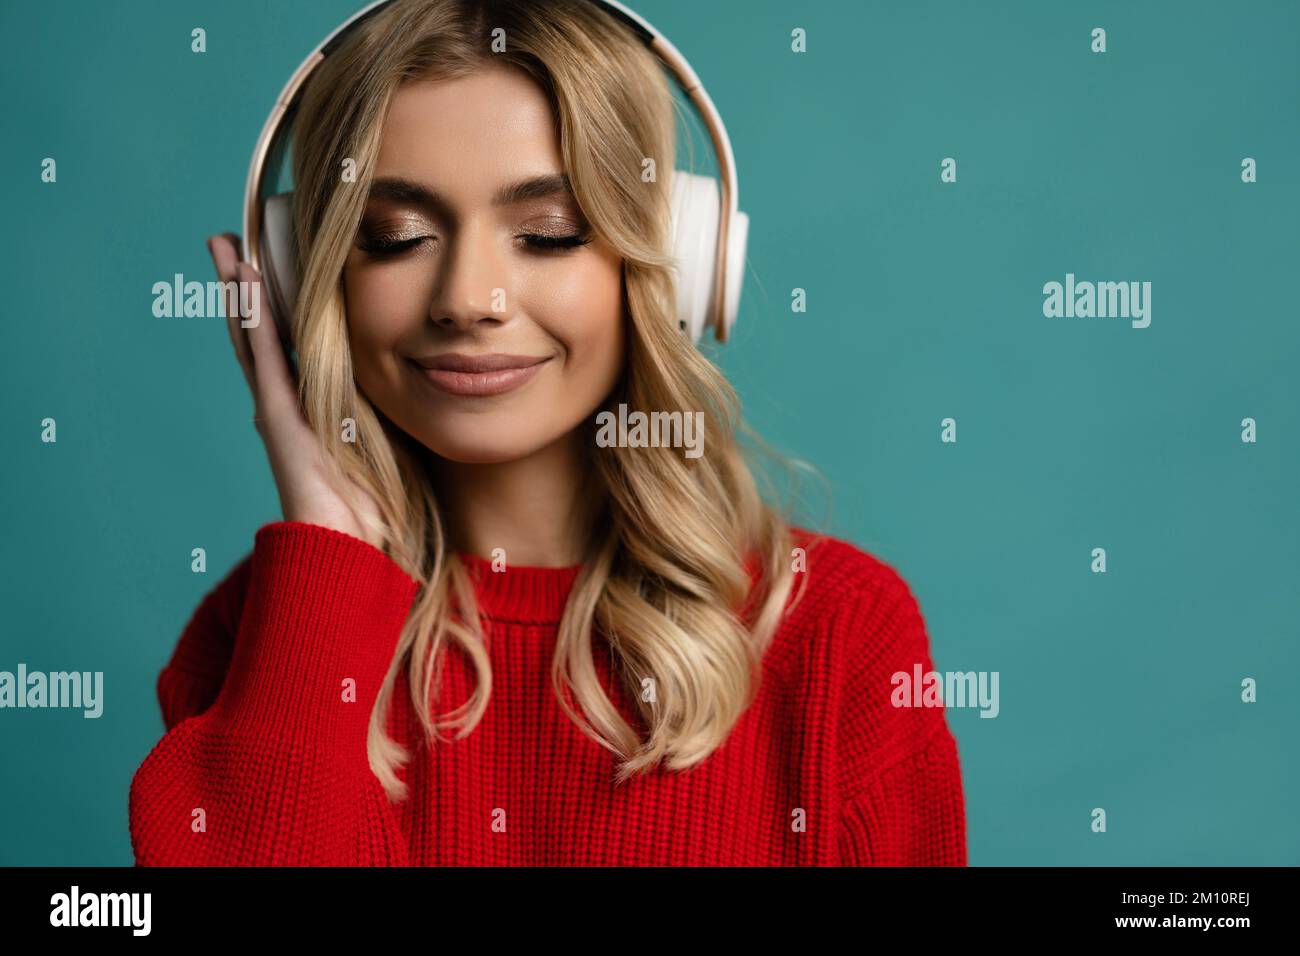 Portrait of charming blonde woman in massive headphones listening to music on isolated beige background. Stock Photo